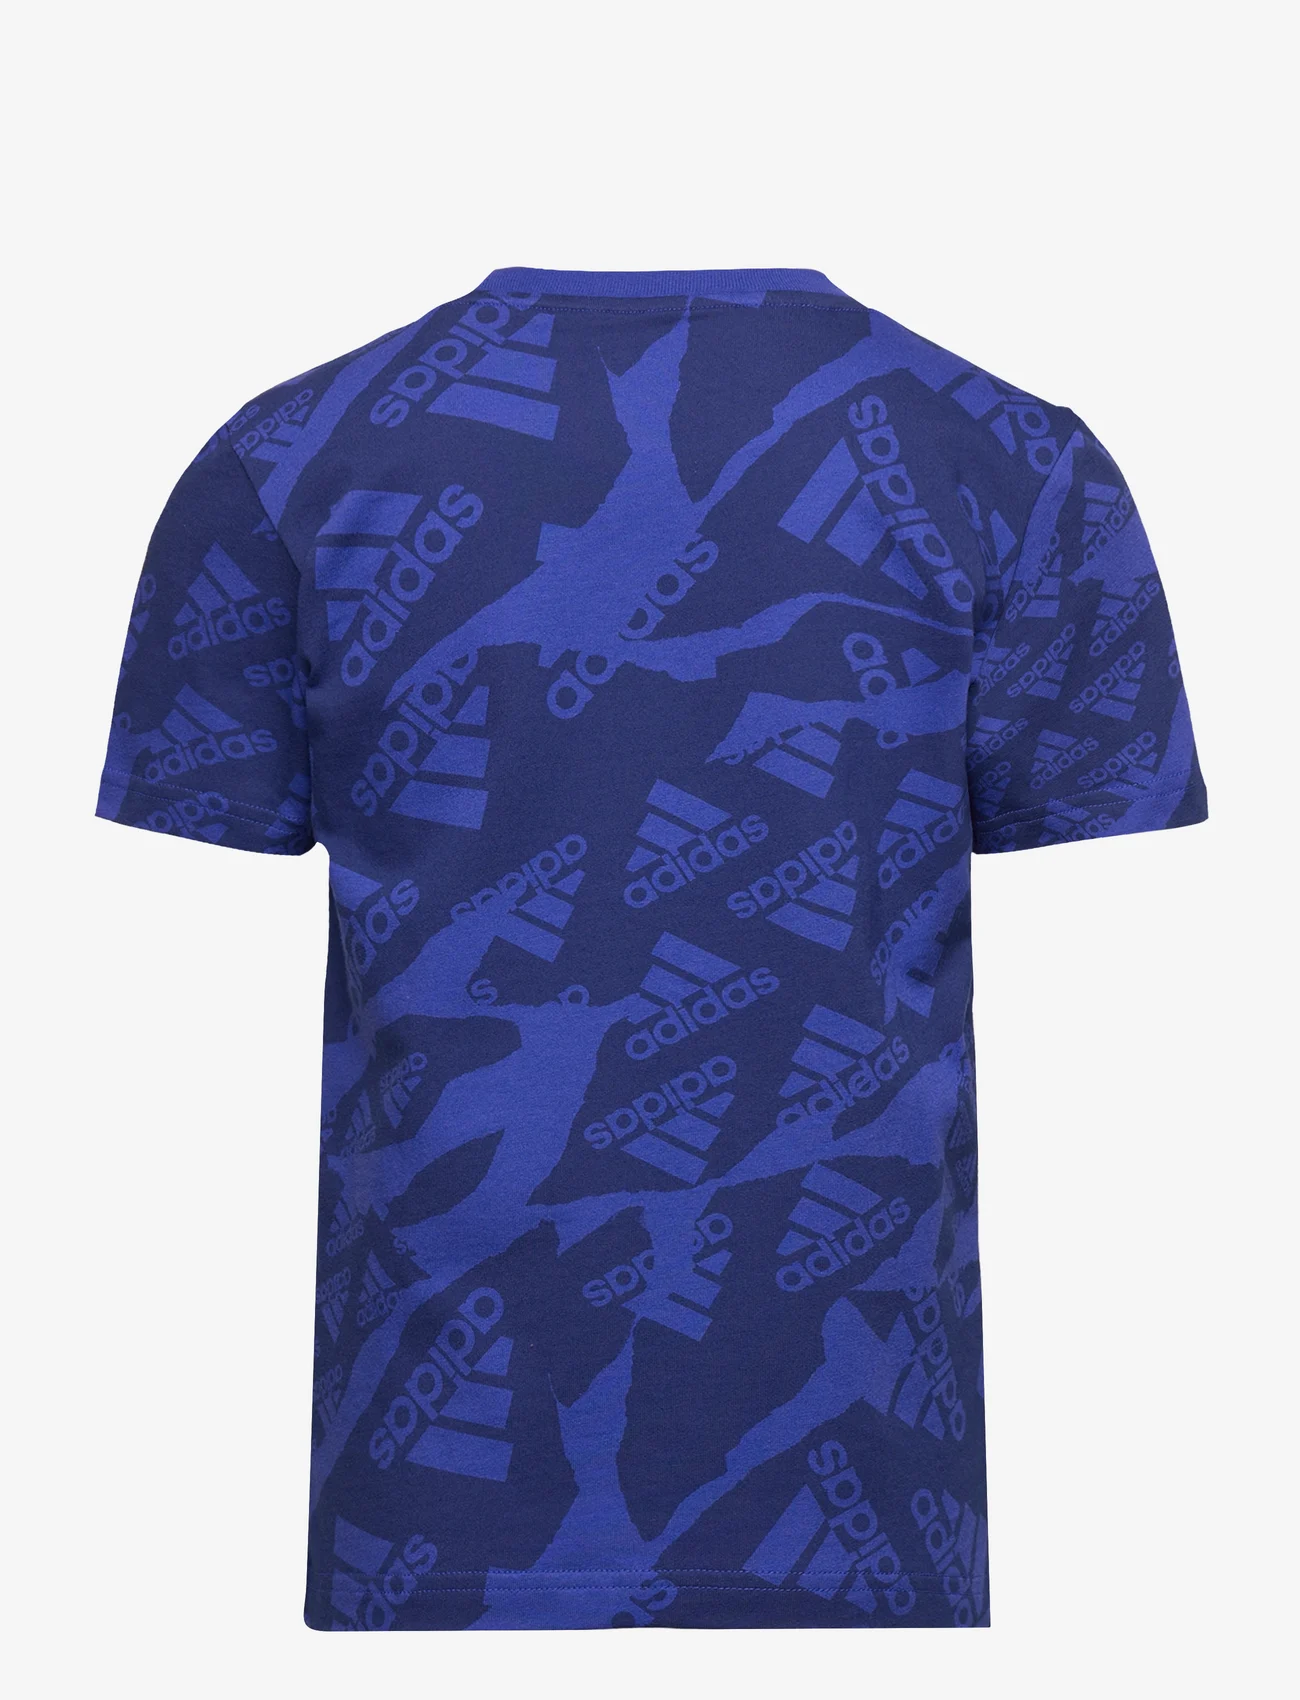 adidas Performance - J CAMLOG T - short-sleeved t-shirts - selubl/dkblue - 1